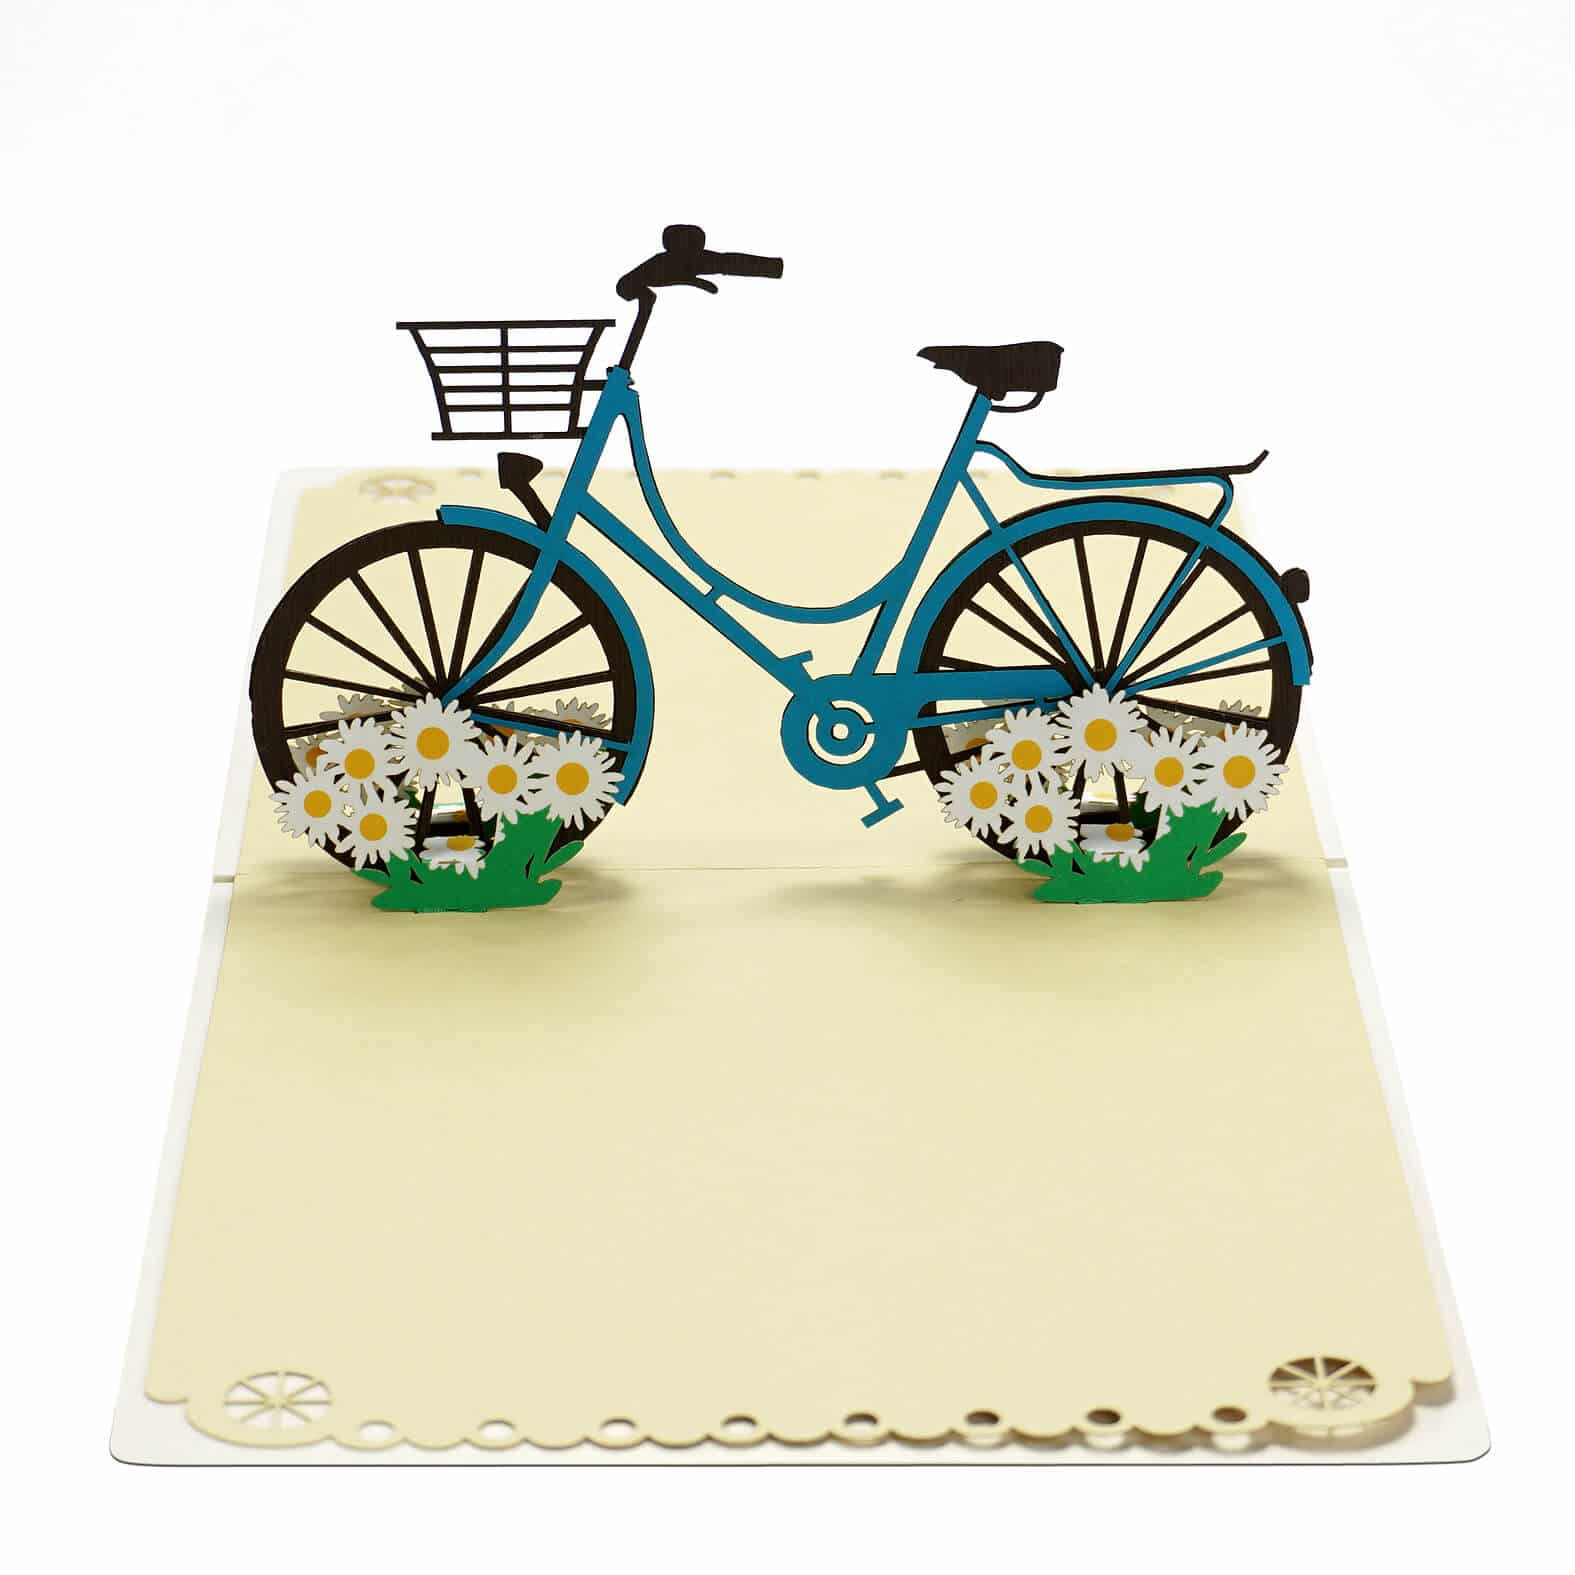 Lovely Bicycle Pop Up Card